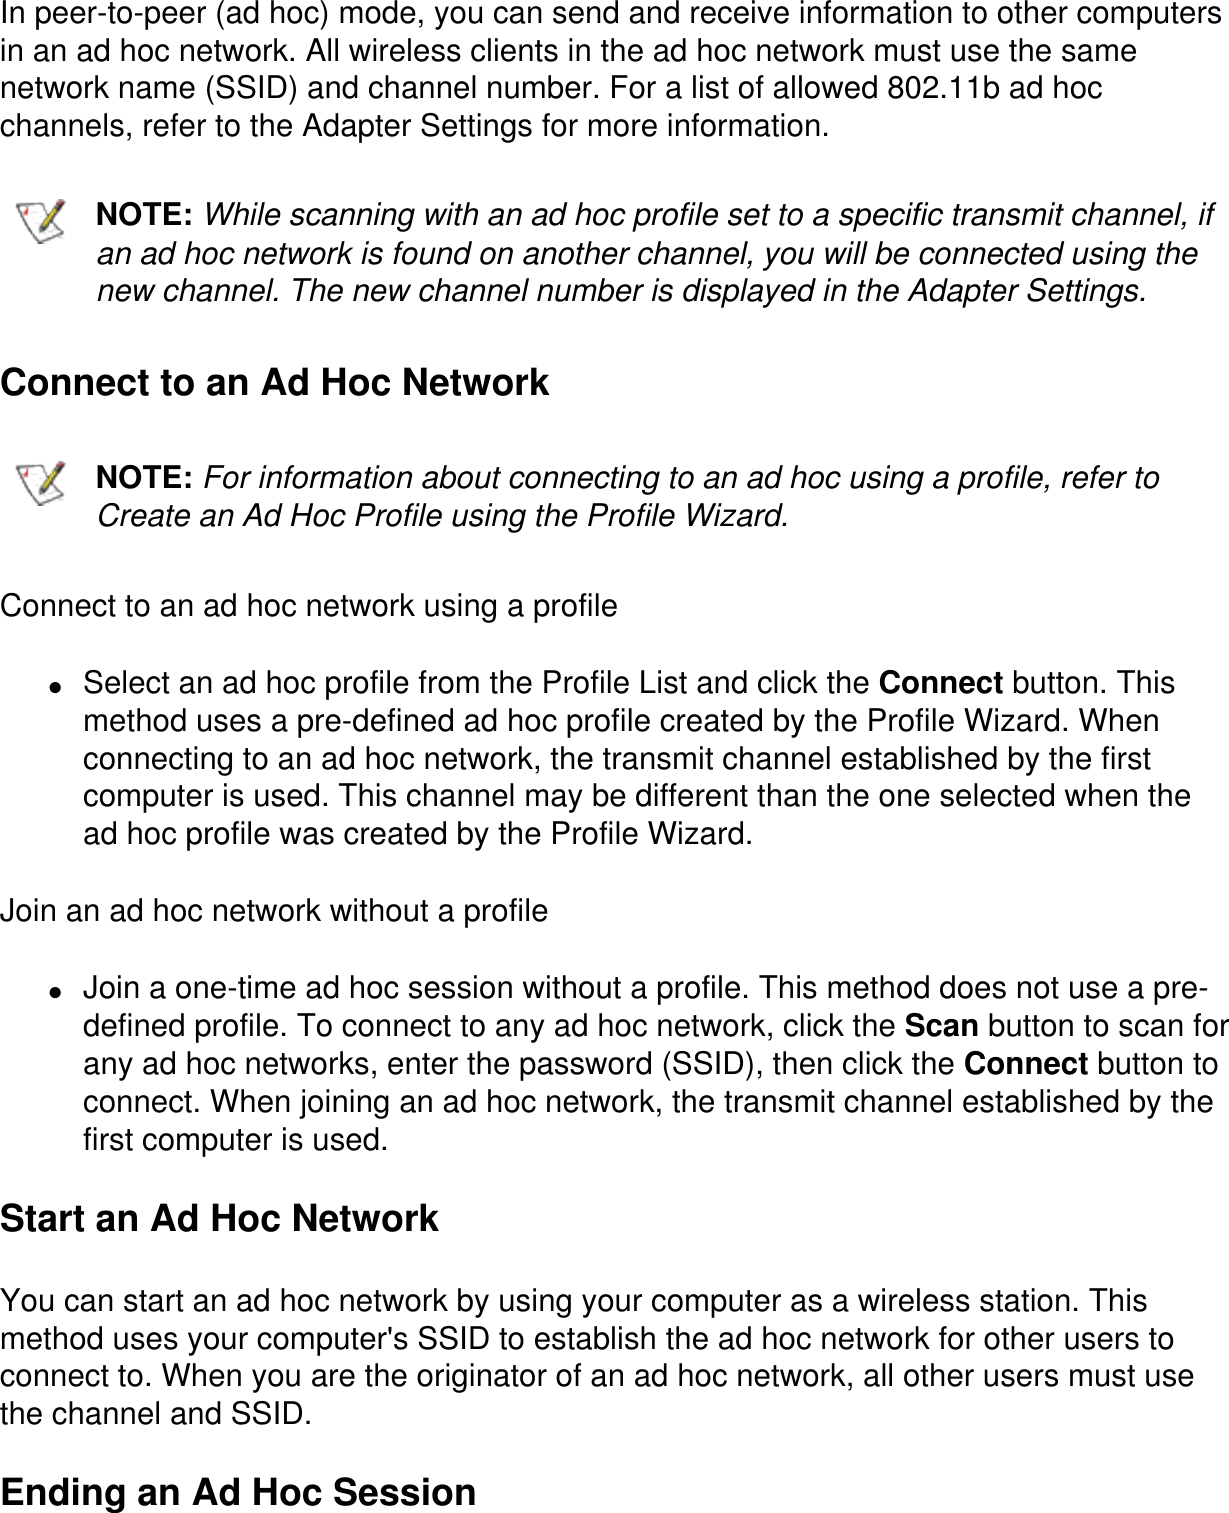 In peer-to-peer (ad hoc) mode, you can send and receive information to other computers in an ad hoc network. All wireless clients in the ad hoc network must use the same network name (SSID) and channel number. For a list of allowed 802.11b ad hoc channels, refer to the Adapter Settings for more information.NOTE: While scanning with an ad hoc profile set to a specific transmit channel, if an ad hoc network is found on another channel, you will be connected using the new channel. The new channel number is displayed in the Adapter Settings.Connect to an Ad Hoc NetworkNOTE: For information about connecting to an ad hoc using a profile, refer to Create an Ad Hoc Profile using the Profile Wizard.Connect to an ad hoc network using a profile●     Select an ad hoc profile from the Profile List and click the Connect button. This method uses a pre-defined ad hoc profile created by the Profile Wizard. When connecting to an ad hoc network, the transmit channel established by the first computer is used. This channel may be different than the one selected when the ad hoc profile was created by the Profile Wizard. Join an ad hoc network without a profile●     Join a one-time ad hoc session without a profile. This method does not use a pre-defined profile. To connect to any ad hoc network, click the Scan button to scan for any ad hoc networks, enter the password (SSID), then click the Connect button to connect. When joining an ad hoc network, the transmit channel established by the first computer is used. Start an Ad Hoc NetworkYou can start an ad hoc network by using your computer as a wireless station. This method uses your computer&apos;s SSID to establish the ad hoc network for other users to connect to. When you are the originator of an ad hoc network, all other users must use the channel and SSID.Ending an Ad Hoc Session